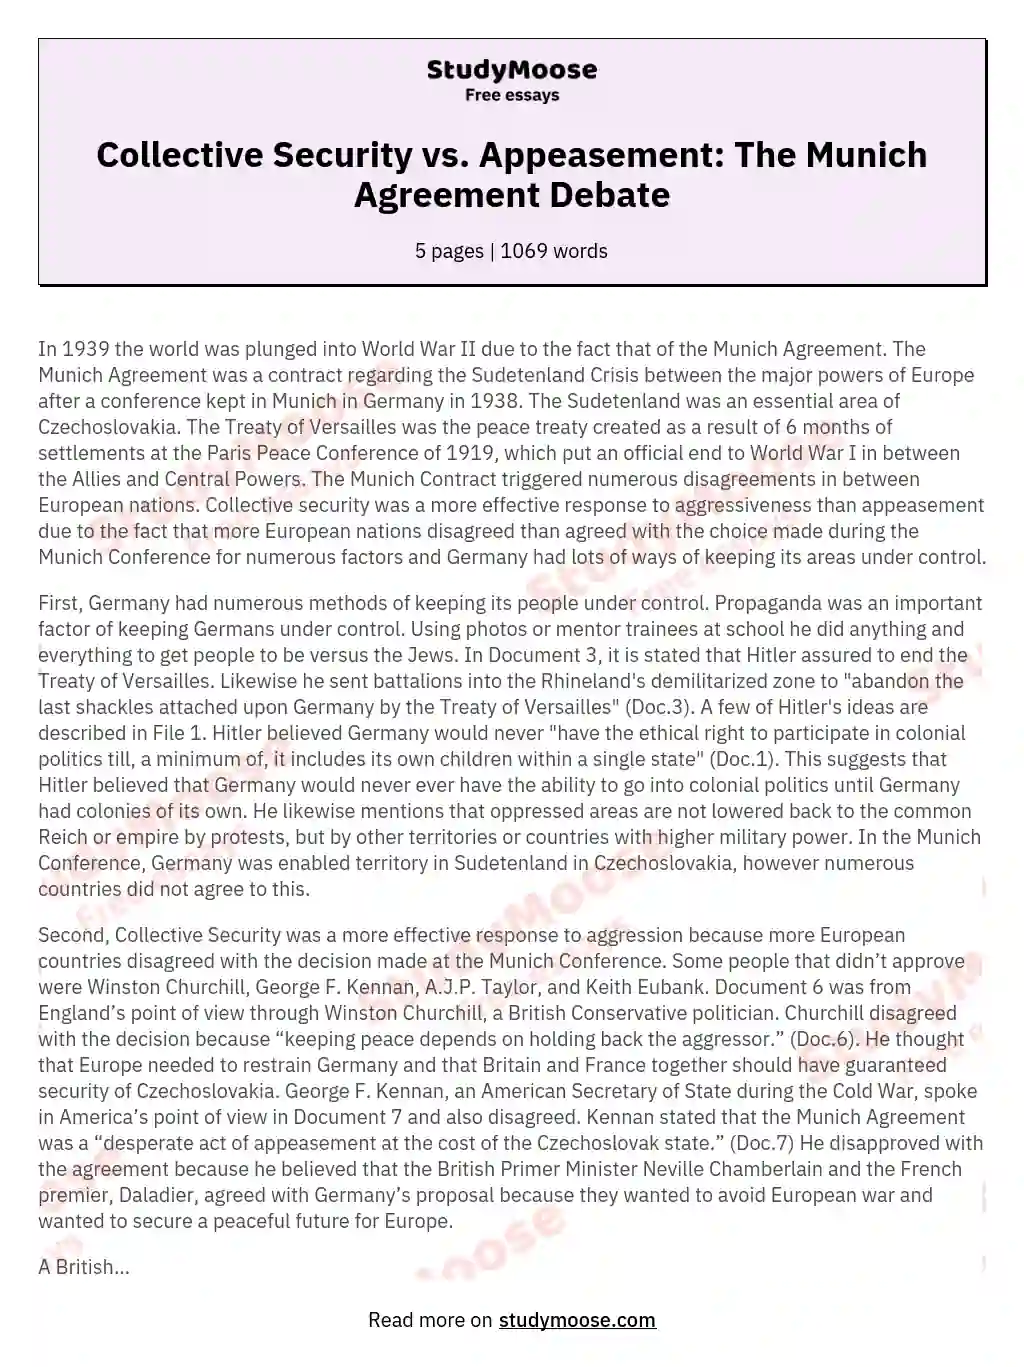 Collective Security vs. Appeasement: The Munich Agreement Debate essay